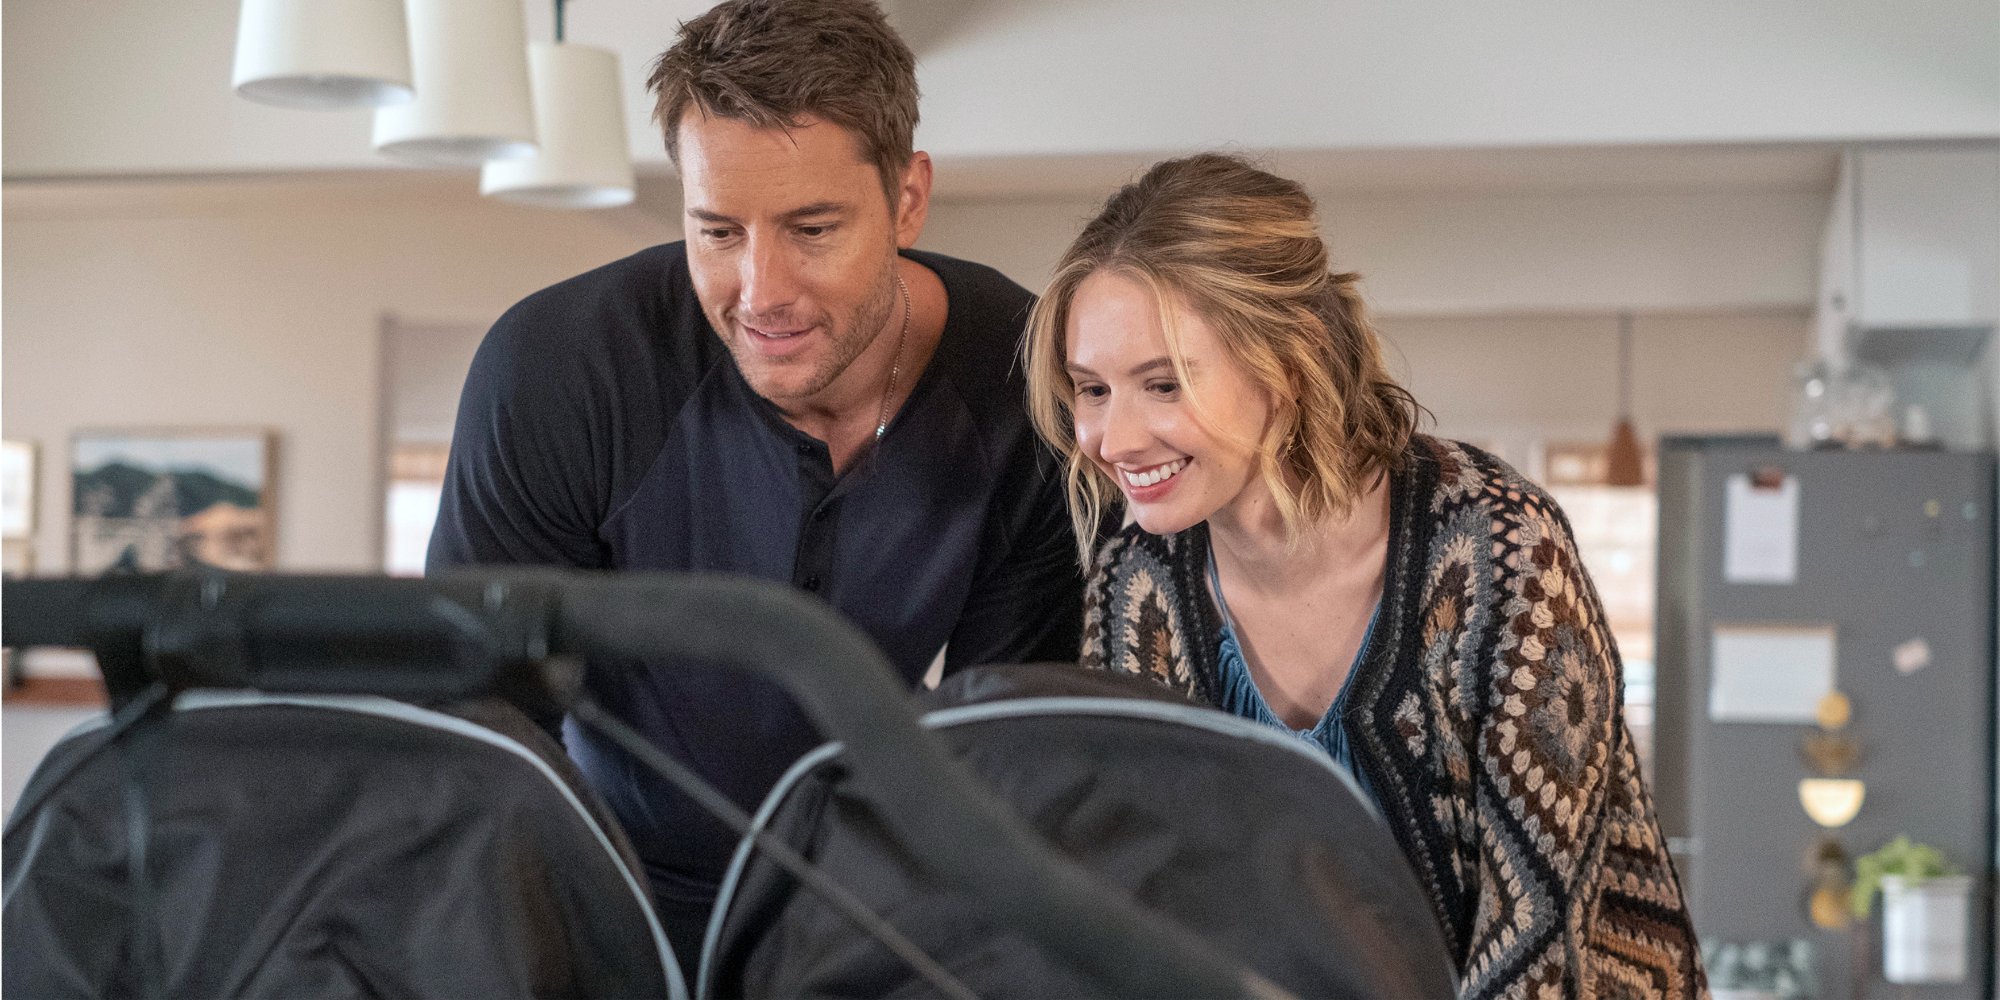 Justin Hartley and Caitlin Thompson on the set of This Is Us.